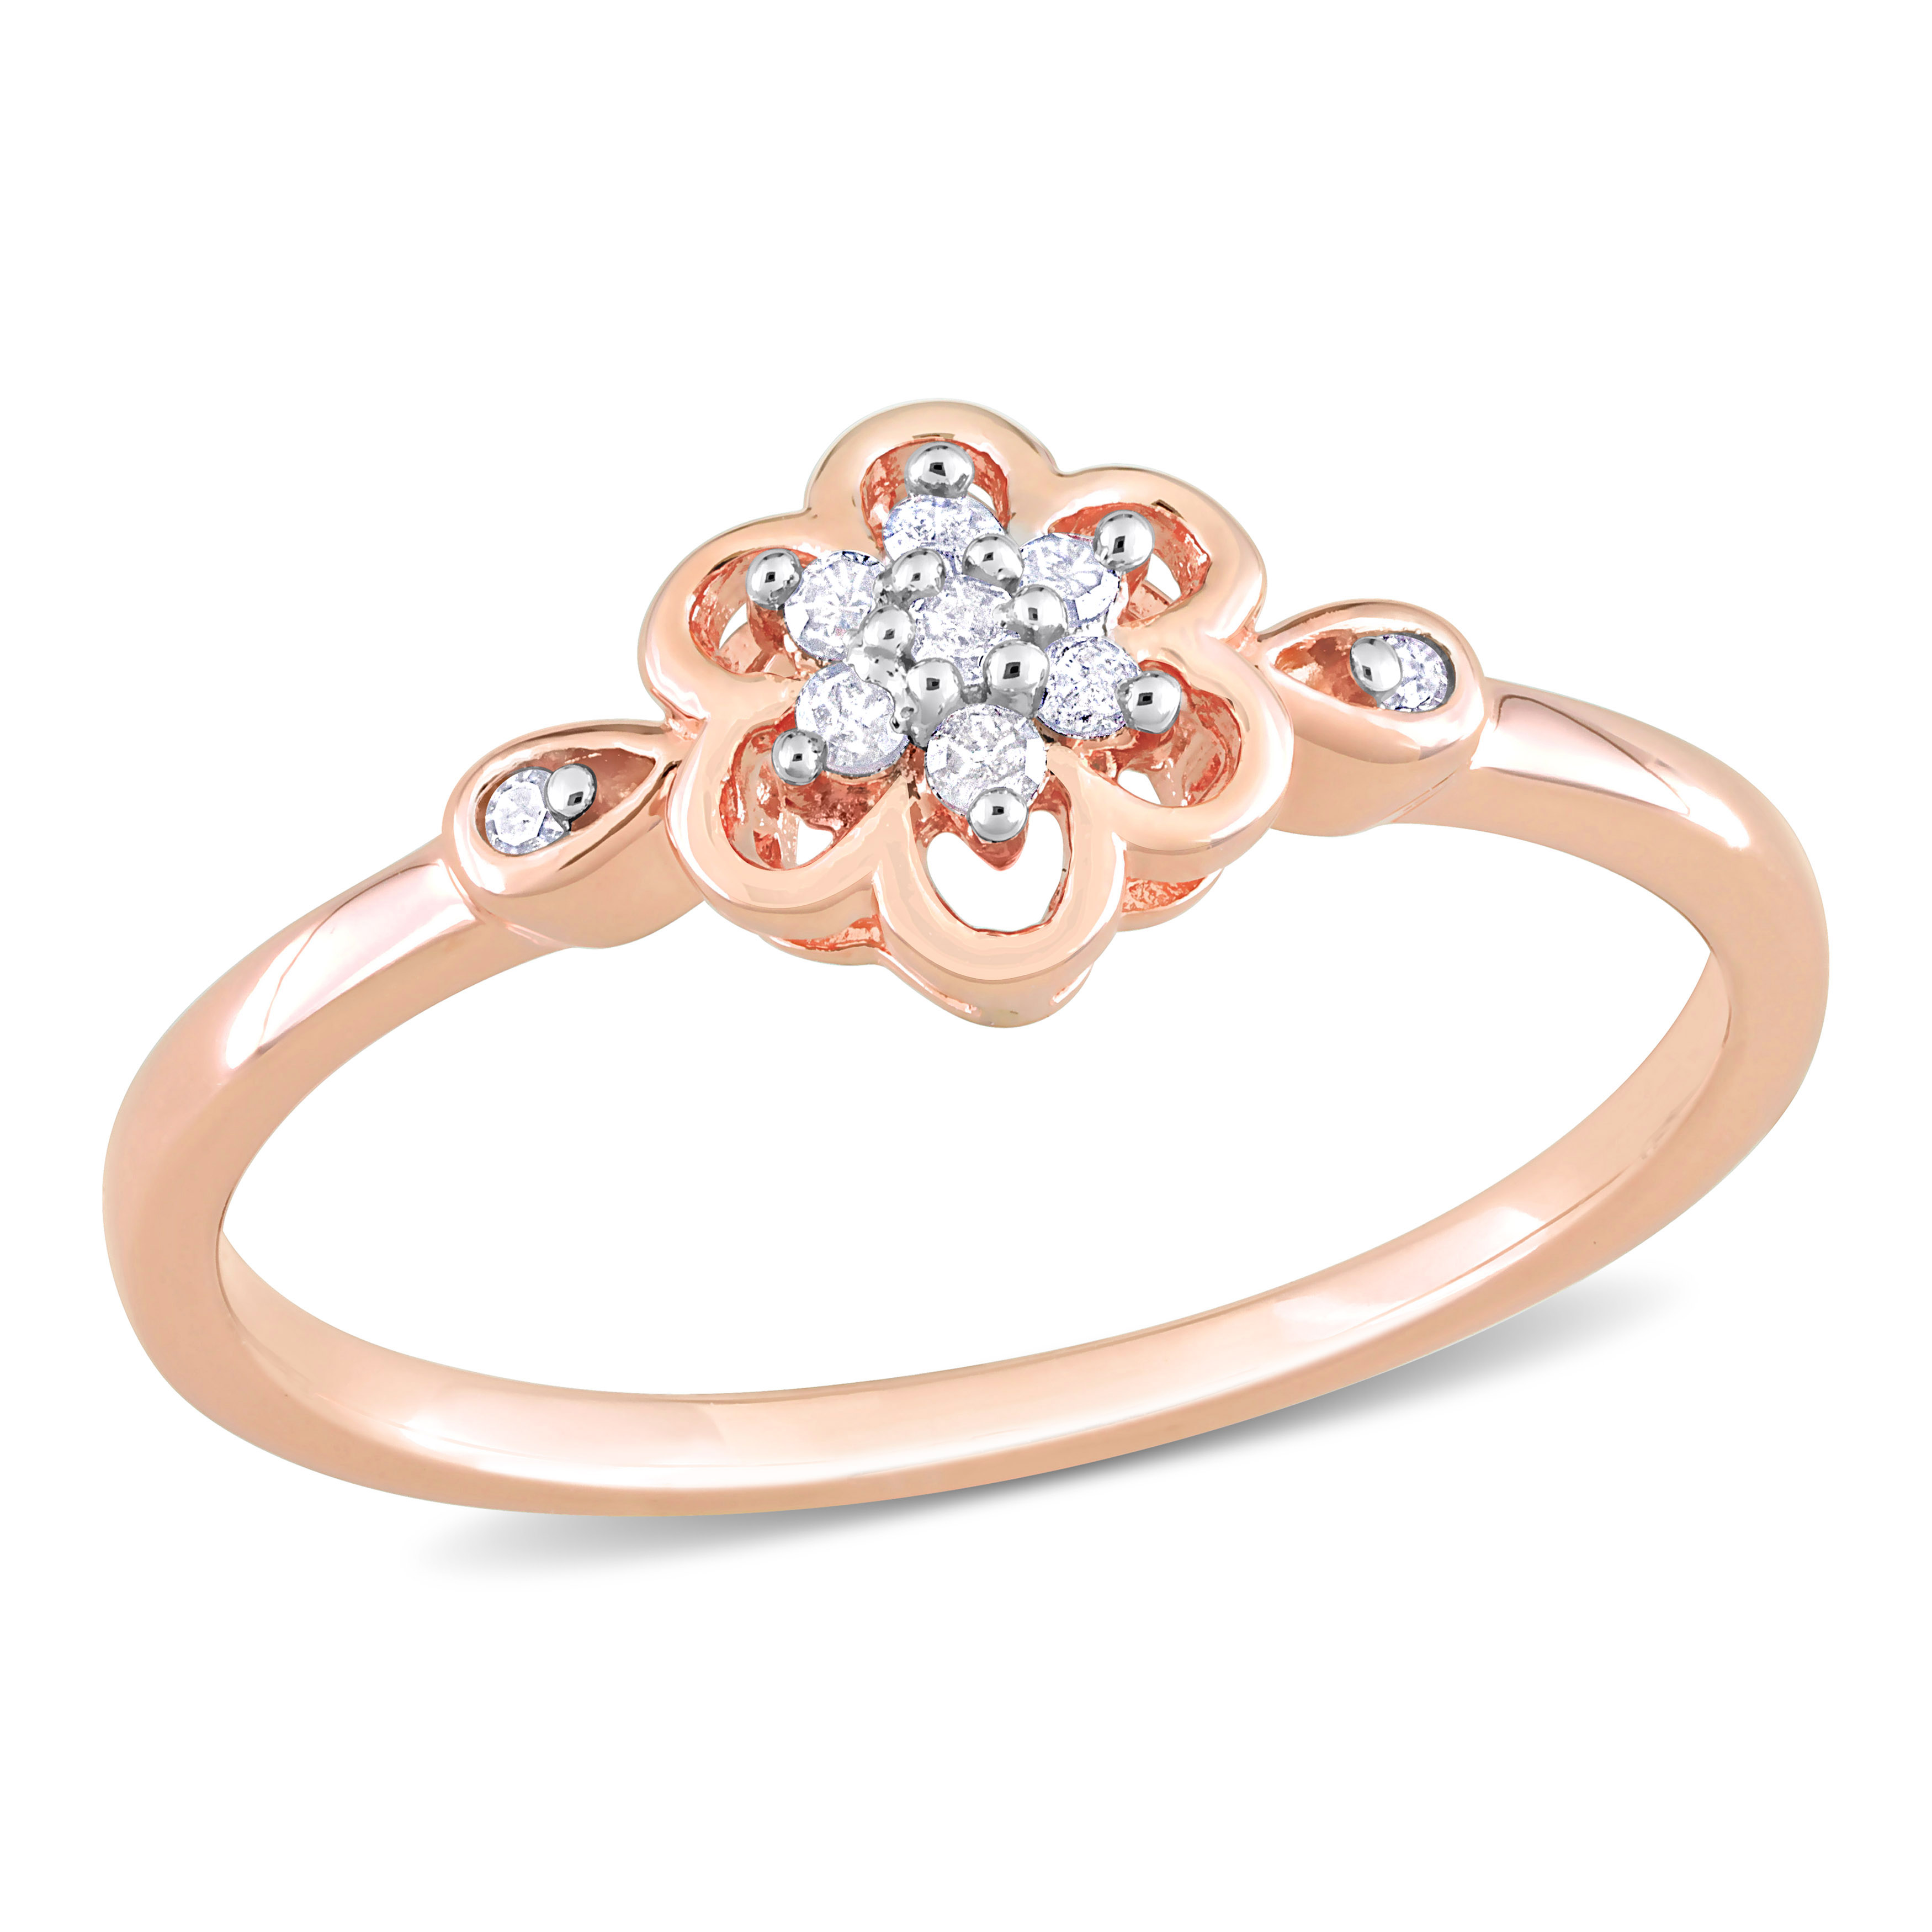 1/10 CT TDW Diamond Flower Ring in Rose Plated Sterling Silver